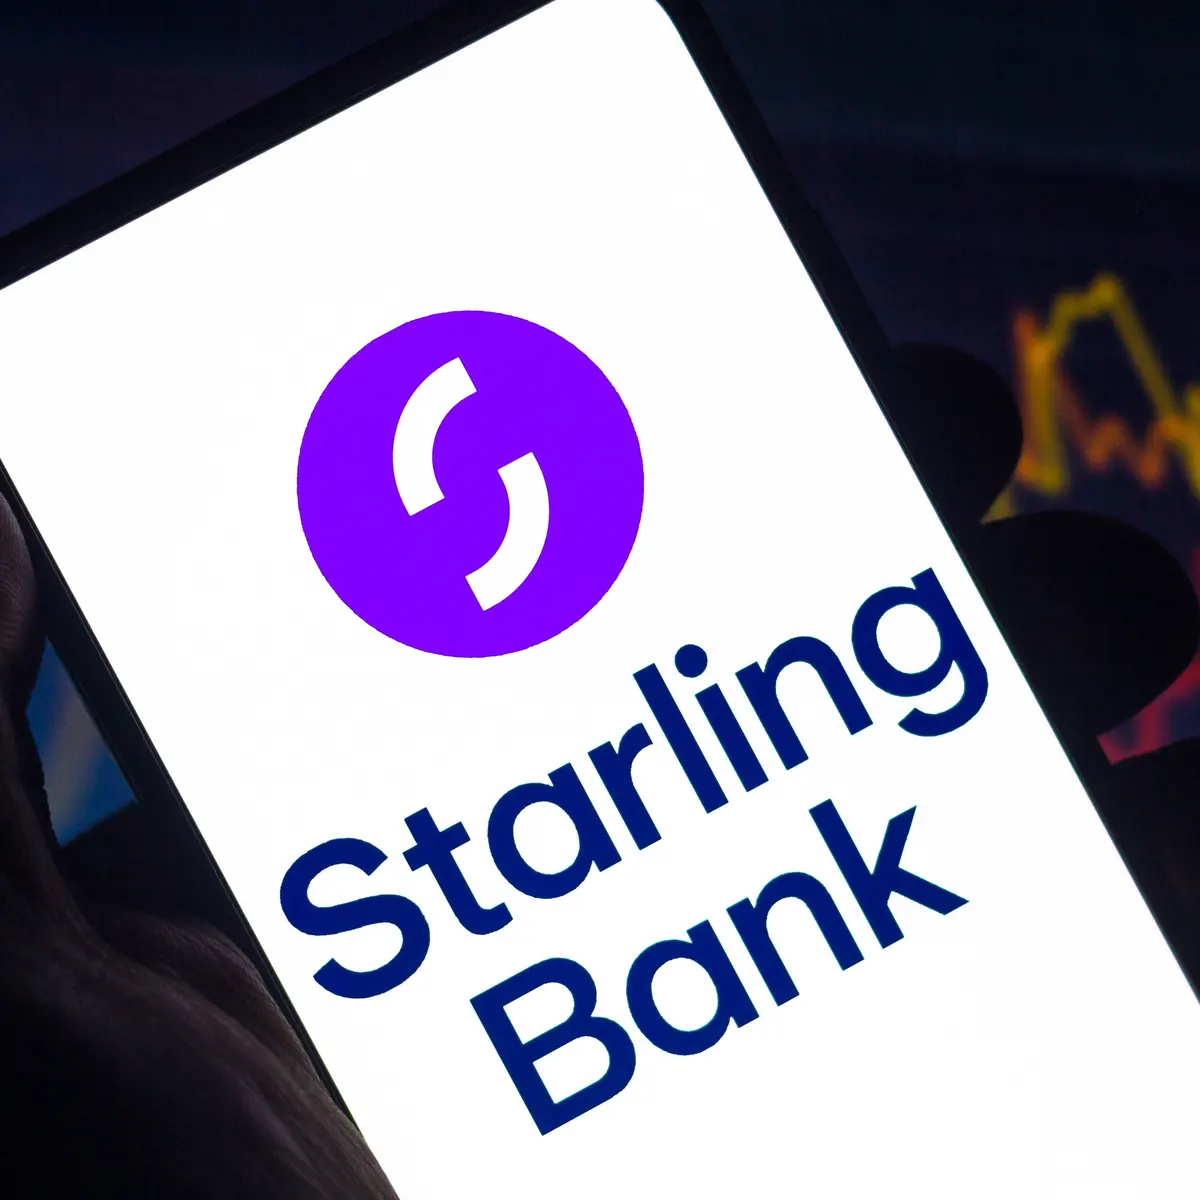 Exclusive: UK based Starling Bank accused of theft from business customer bank account purportedly restricted while under “annual bank account review”